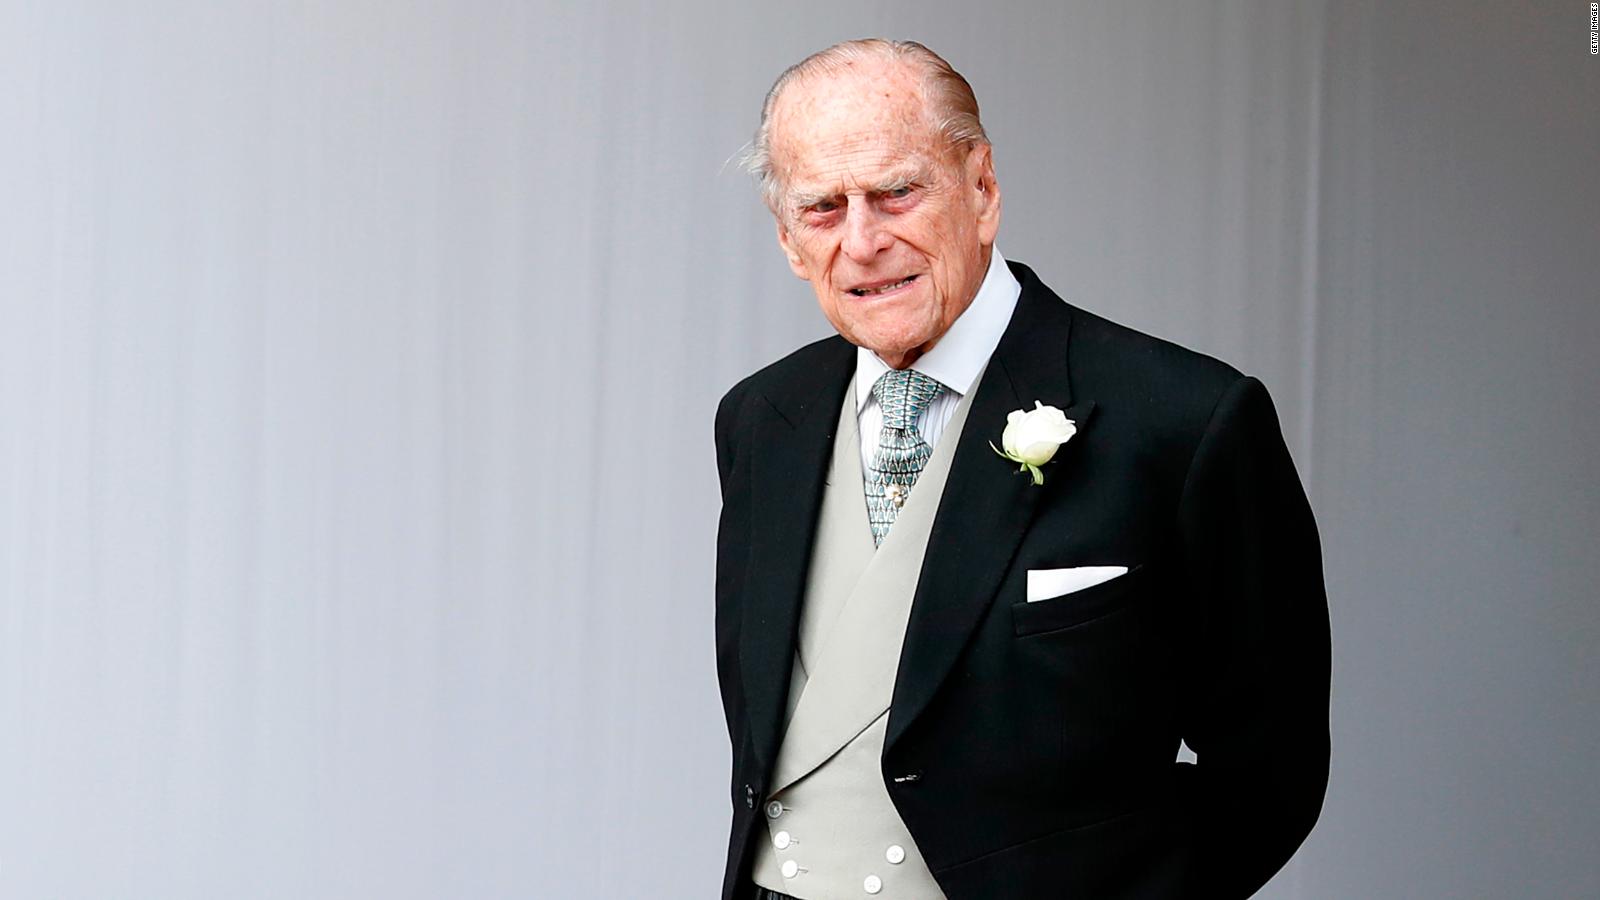 Prince Philip died at the age of 99